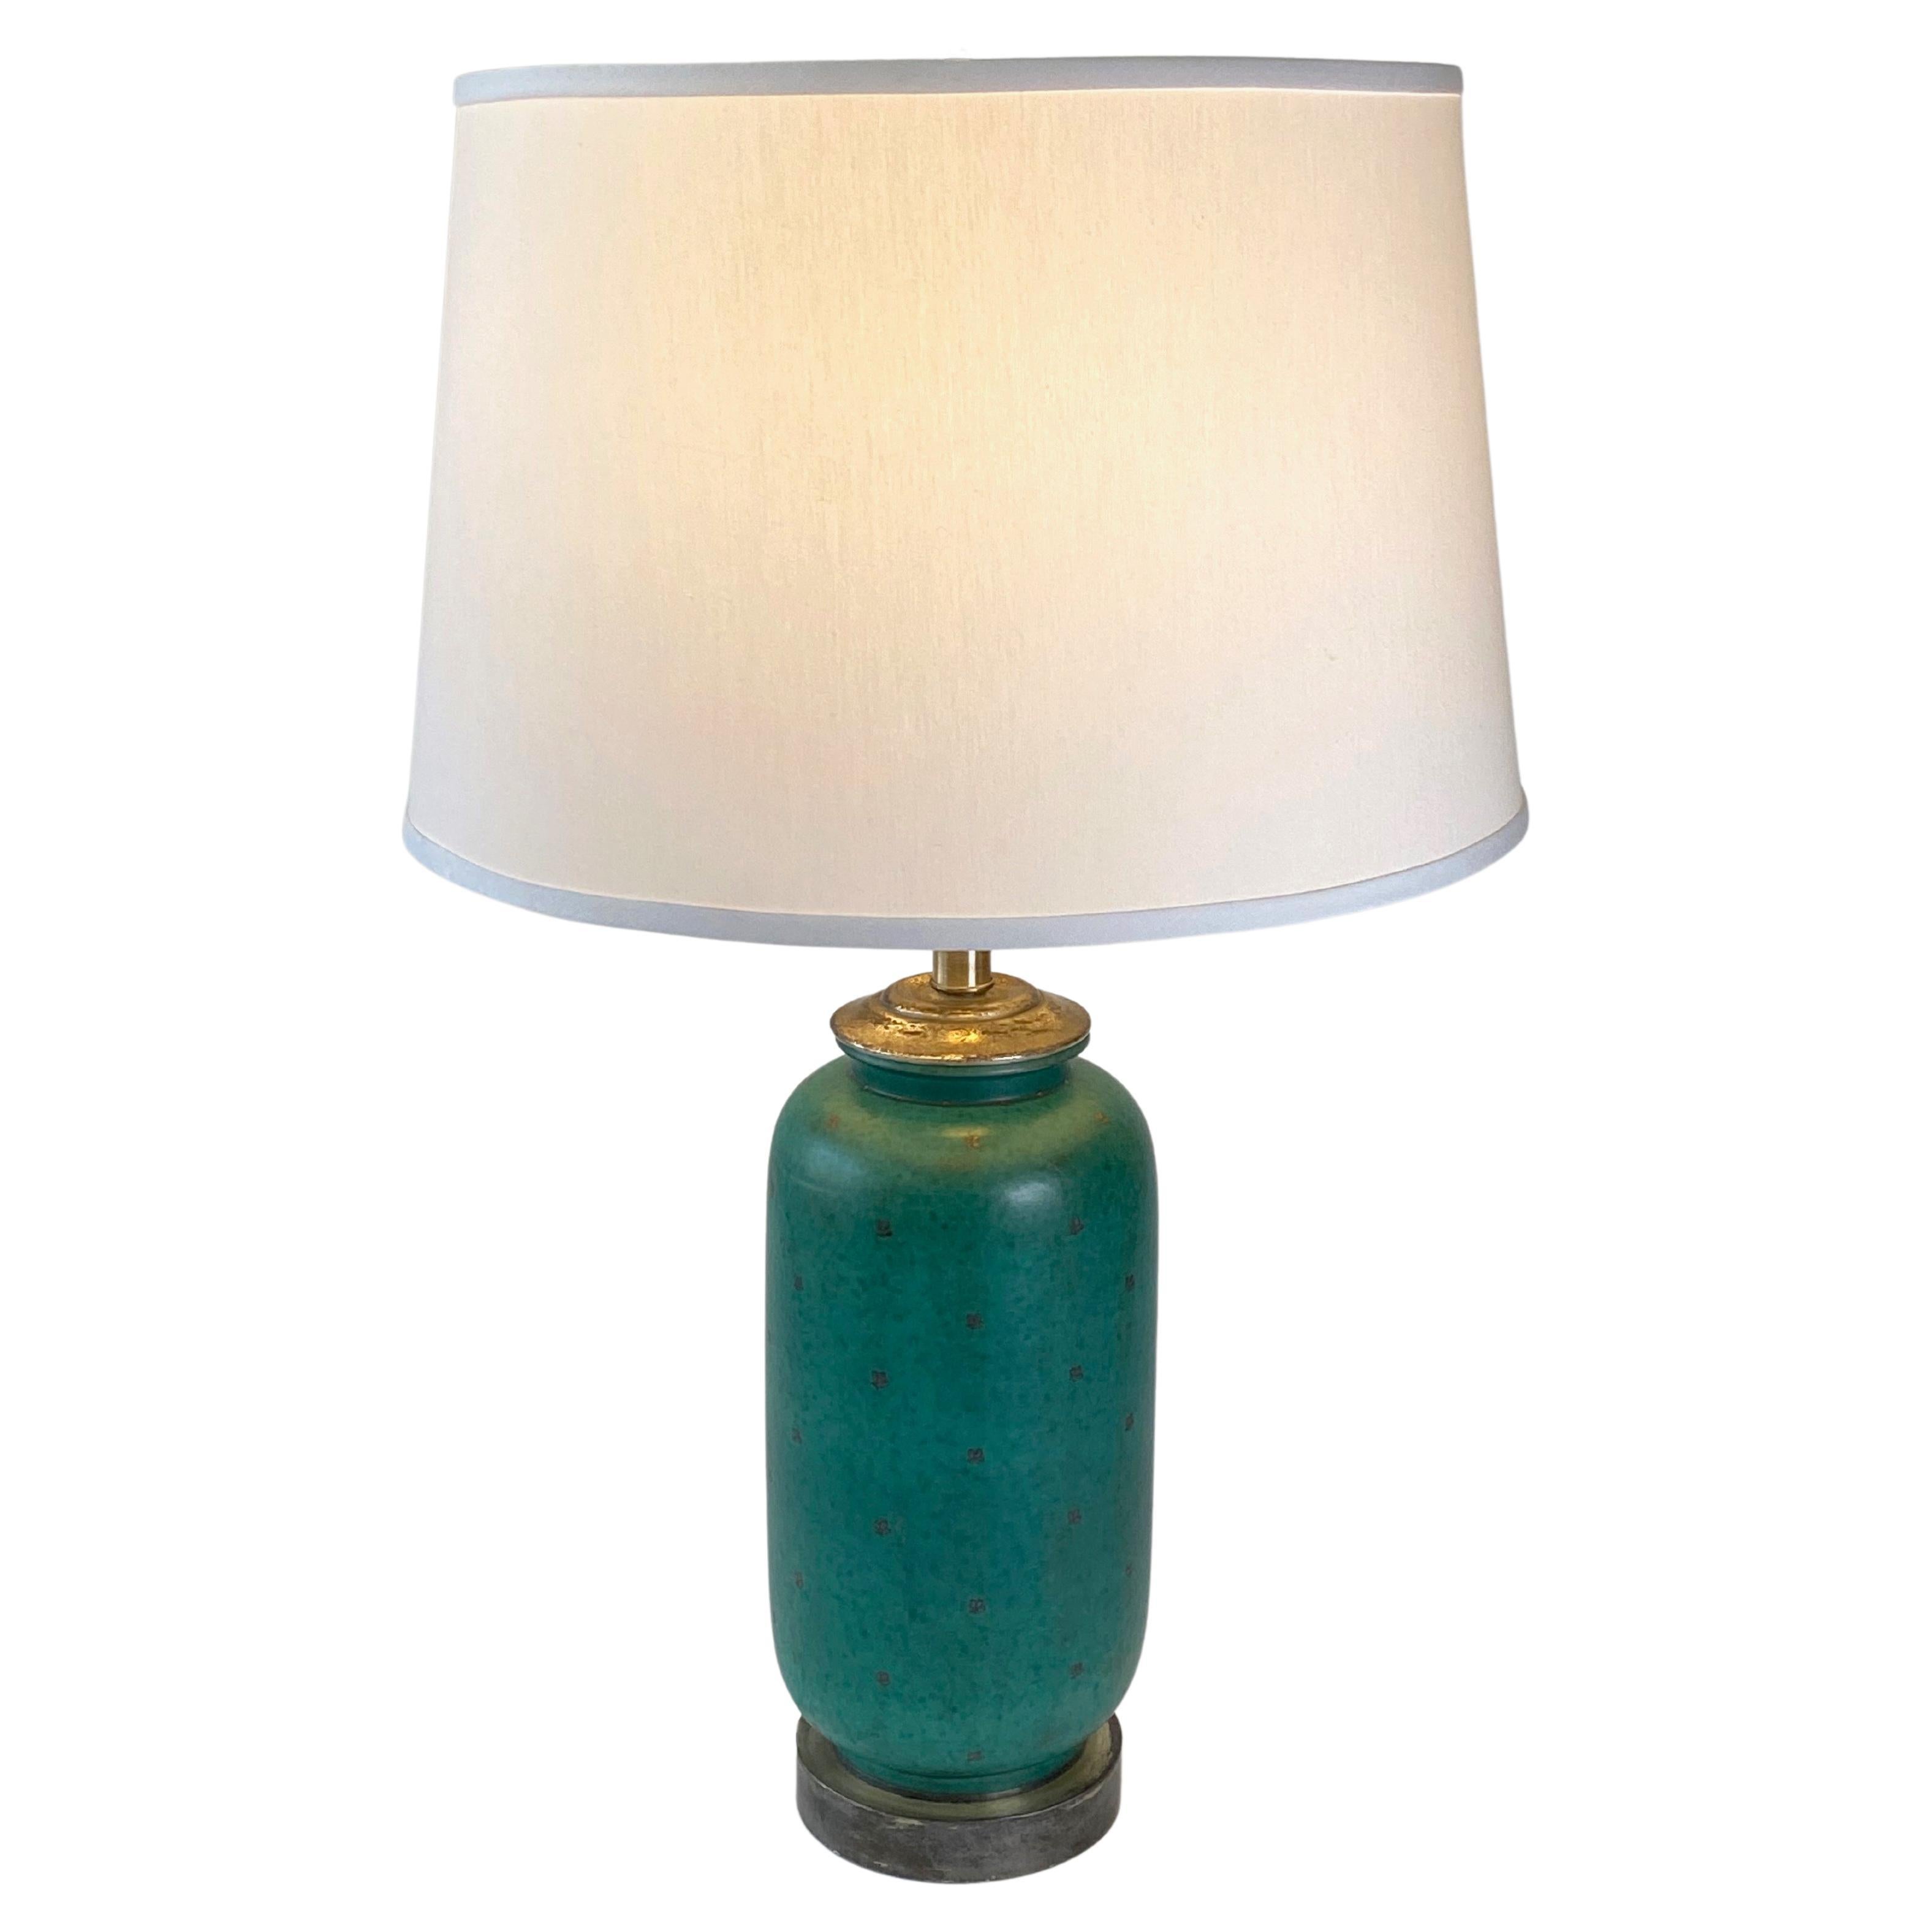 Wilhelm Kage Argenta Green Stoneware & Sterling Silver Table Lamp  